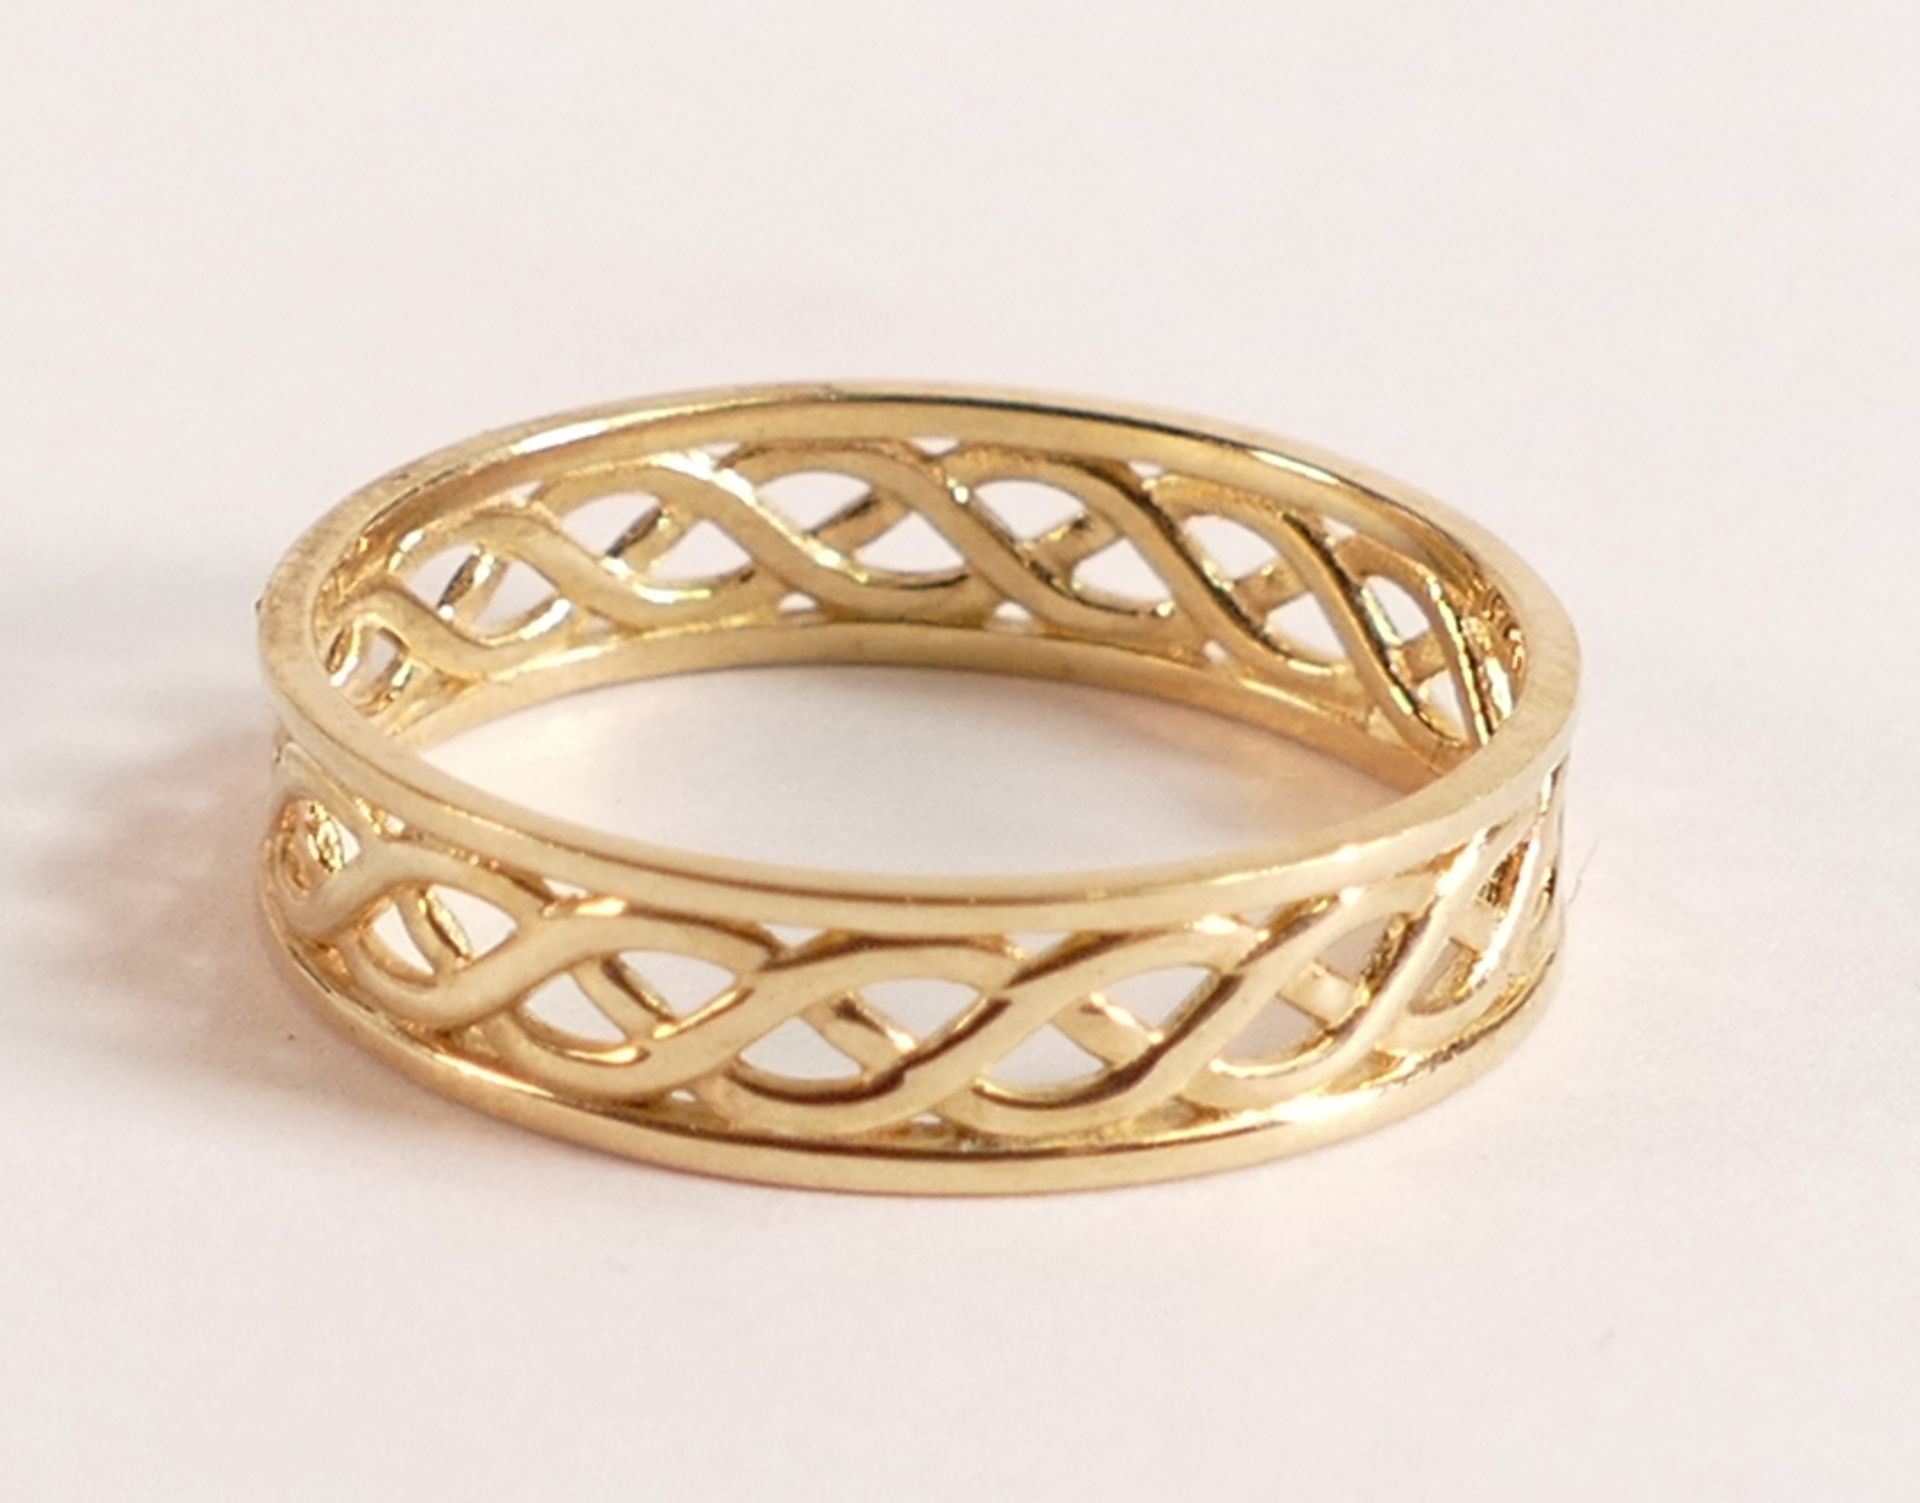 9ct Gold Celtic Band Ring - xxx grams. 9ct Yellow Gold, Celtic Design - Highly Polished - Size T, - Image 3 of 3